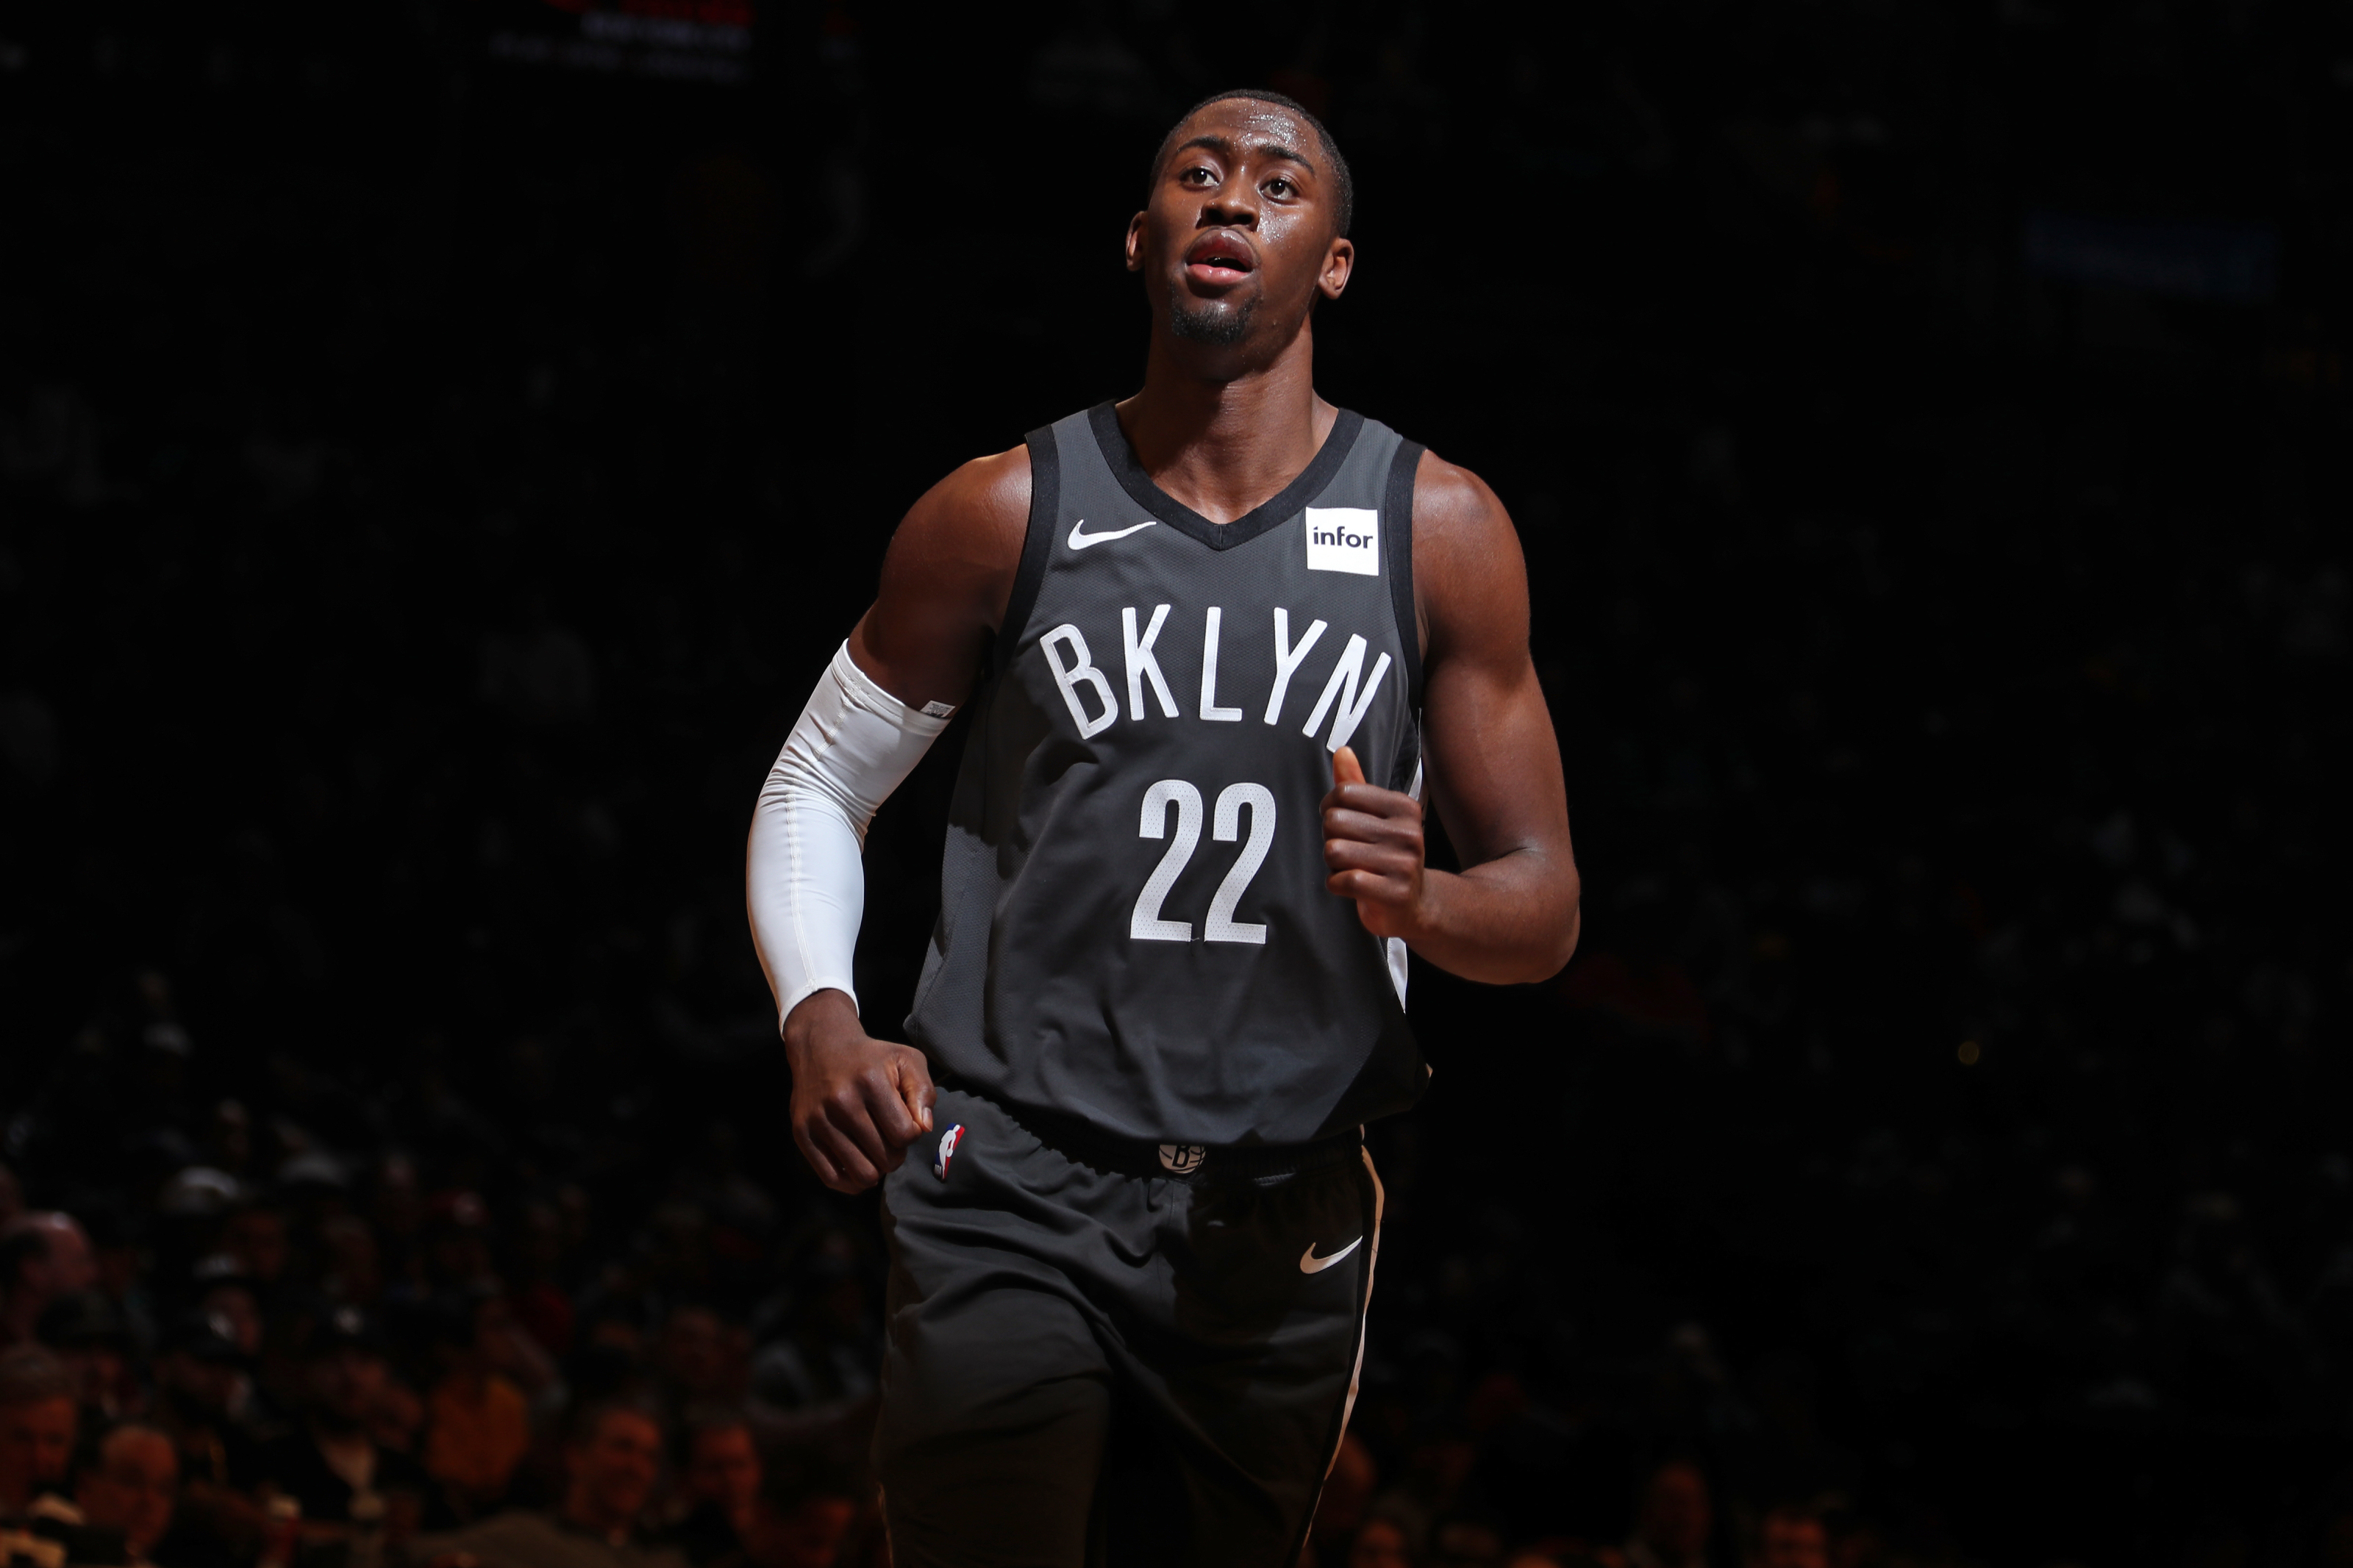 Brooklyn Nets youngster Caris LeVert is a foundational building block